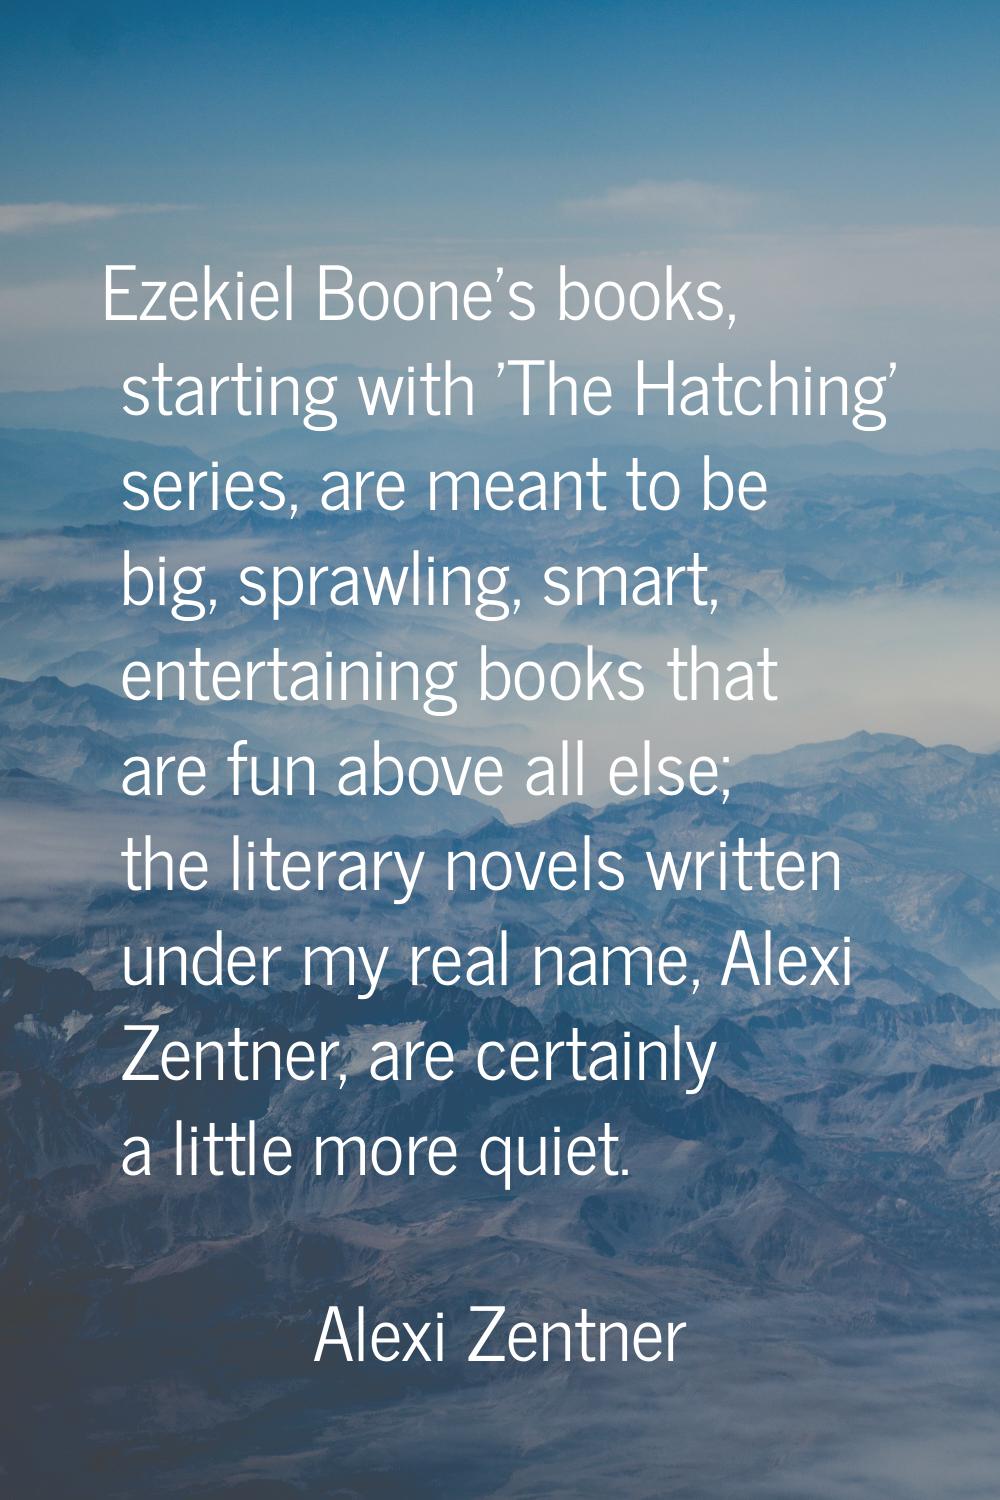 Ezekiel Boone's books, starting with 'The Hatching' series, are meant to be big, sprawling, smart, 